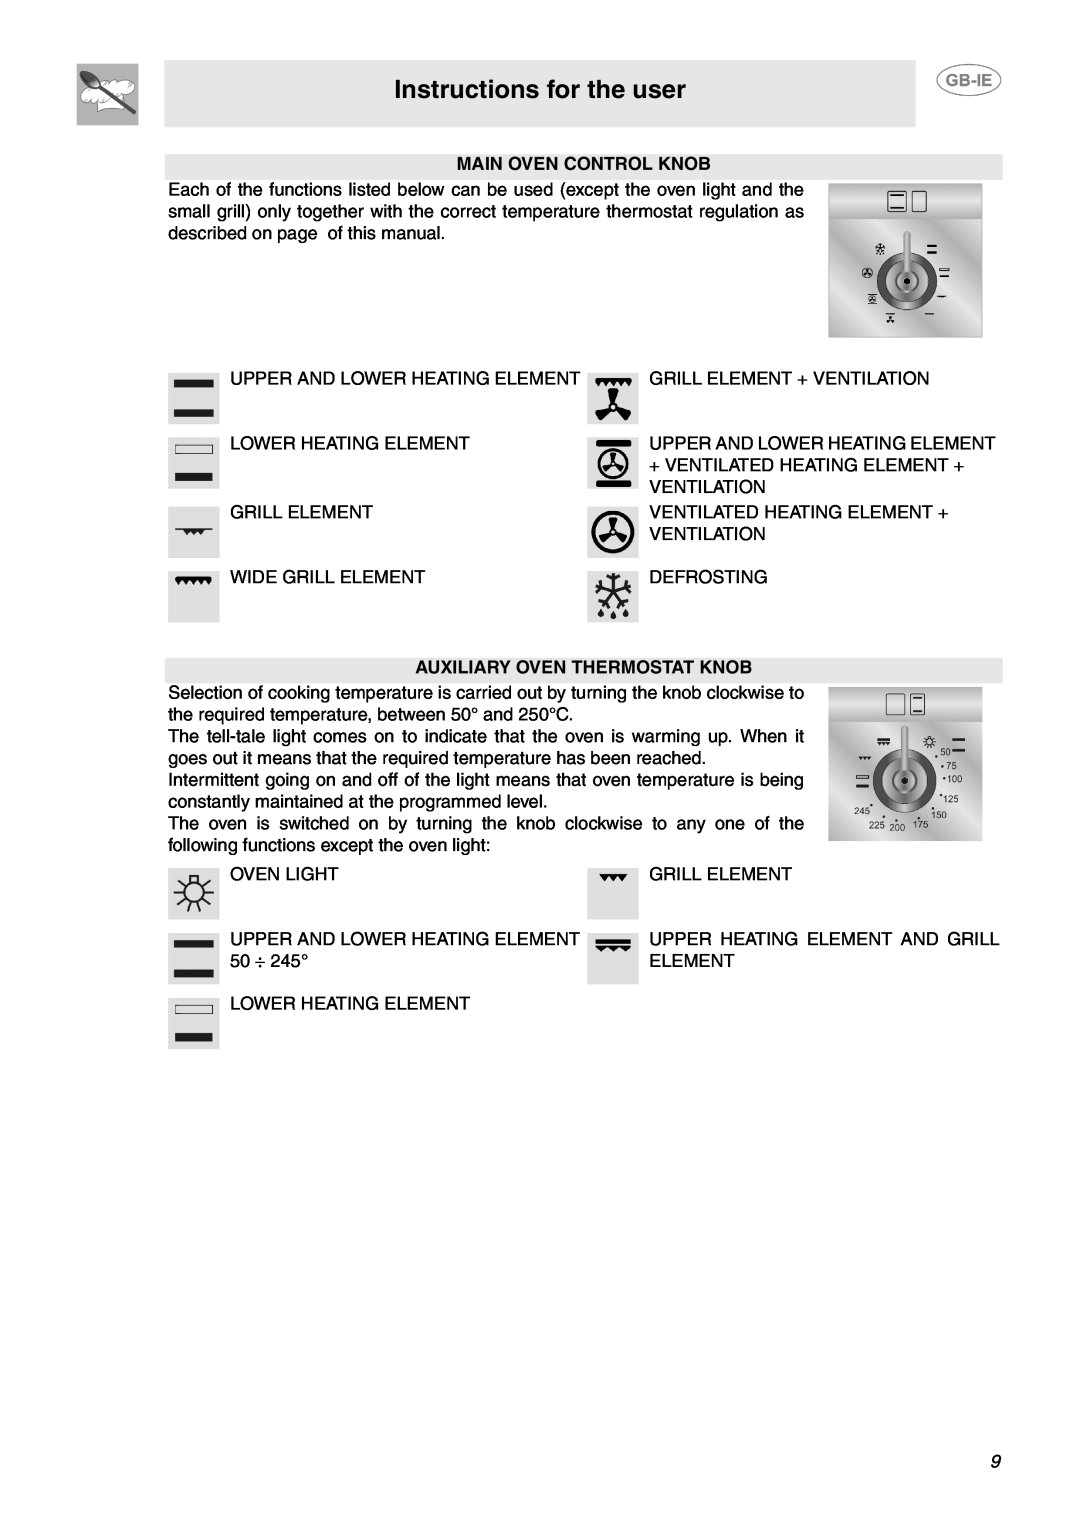 Smeg B102MFX5 manual Instructions for the user, Main Oven Control Knob, Auxiliary Oven Thermostat Knob 